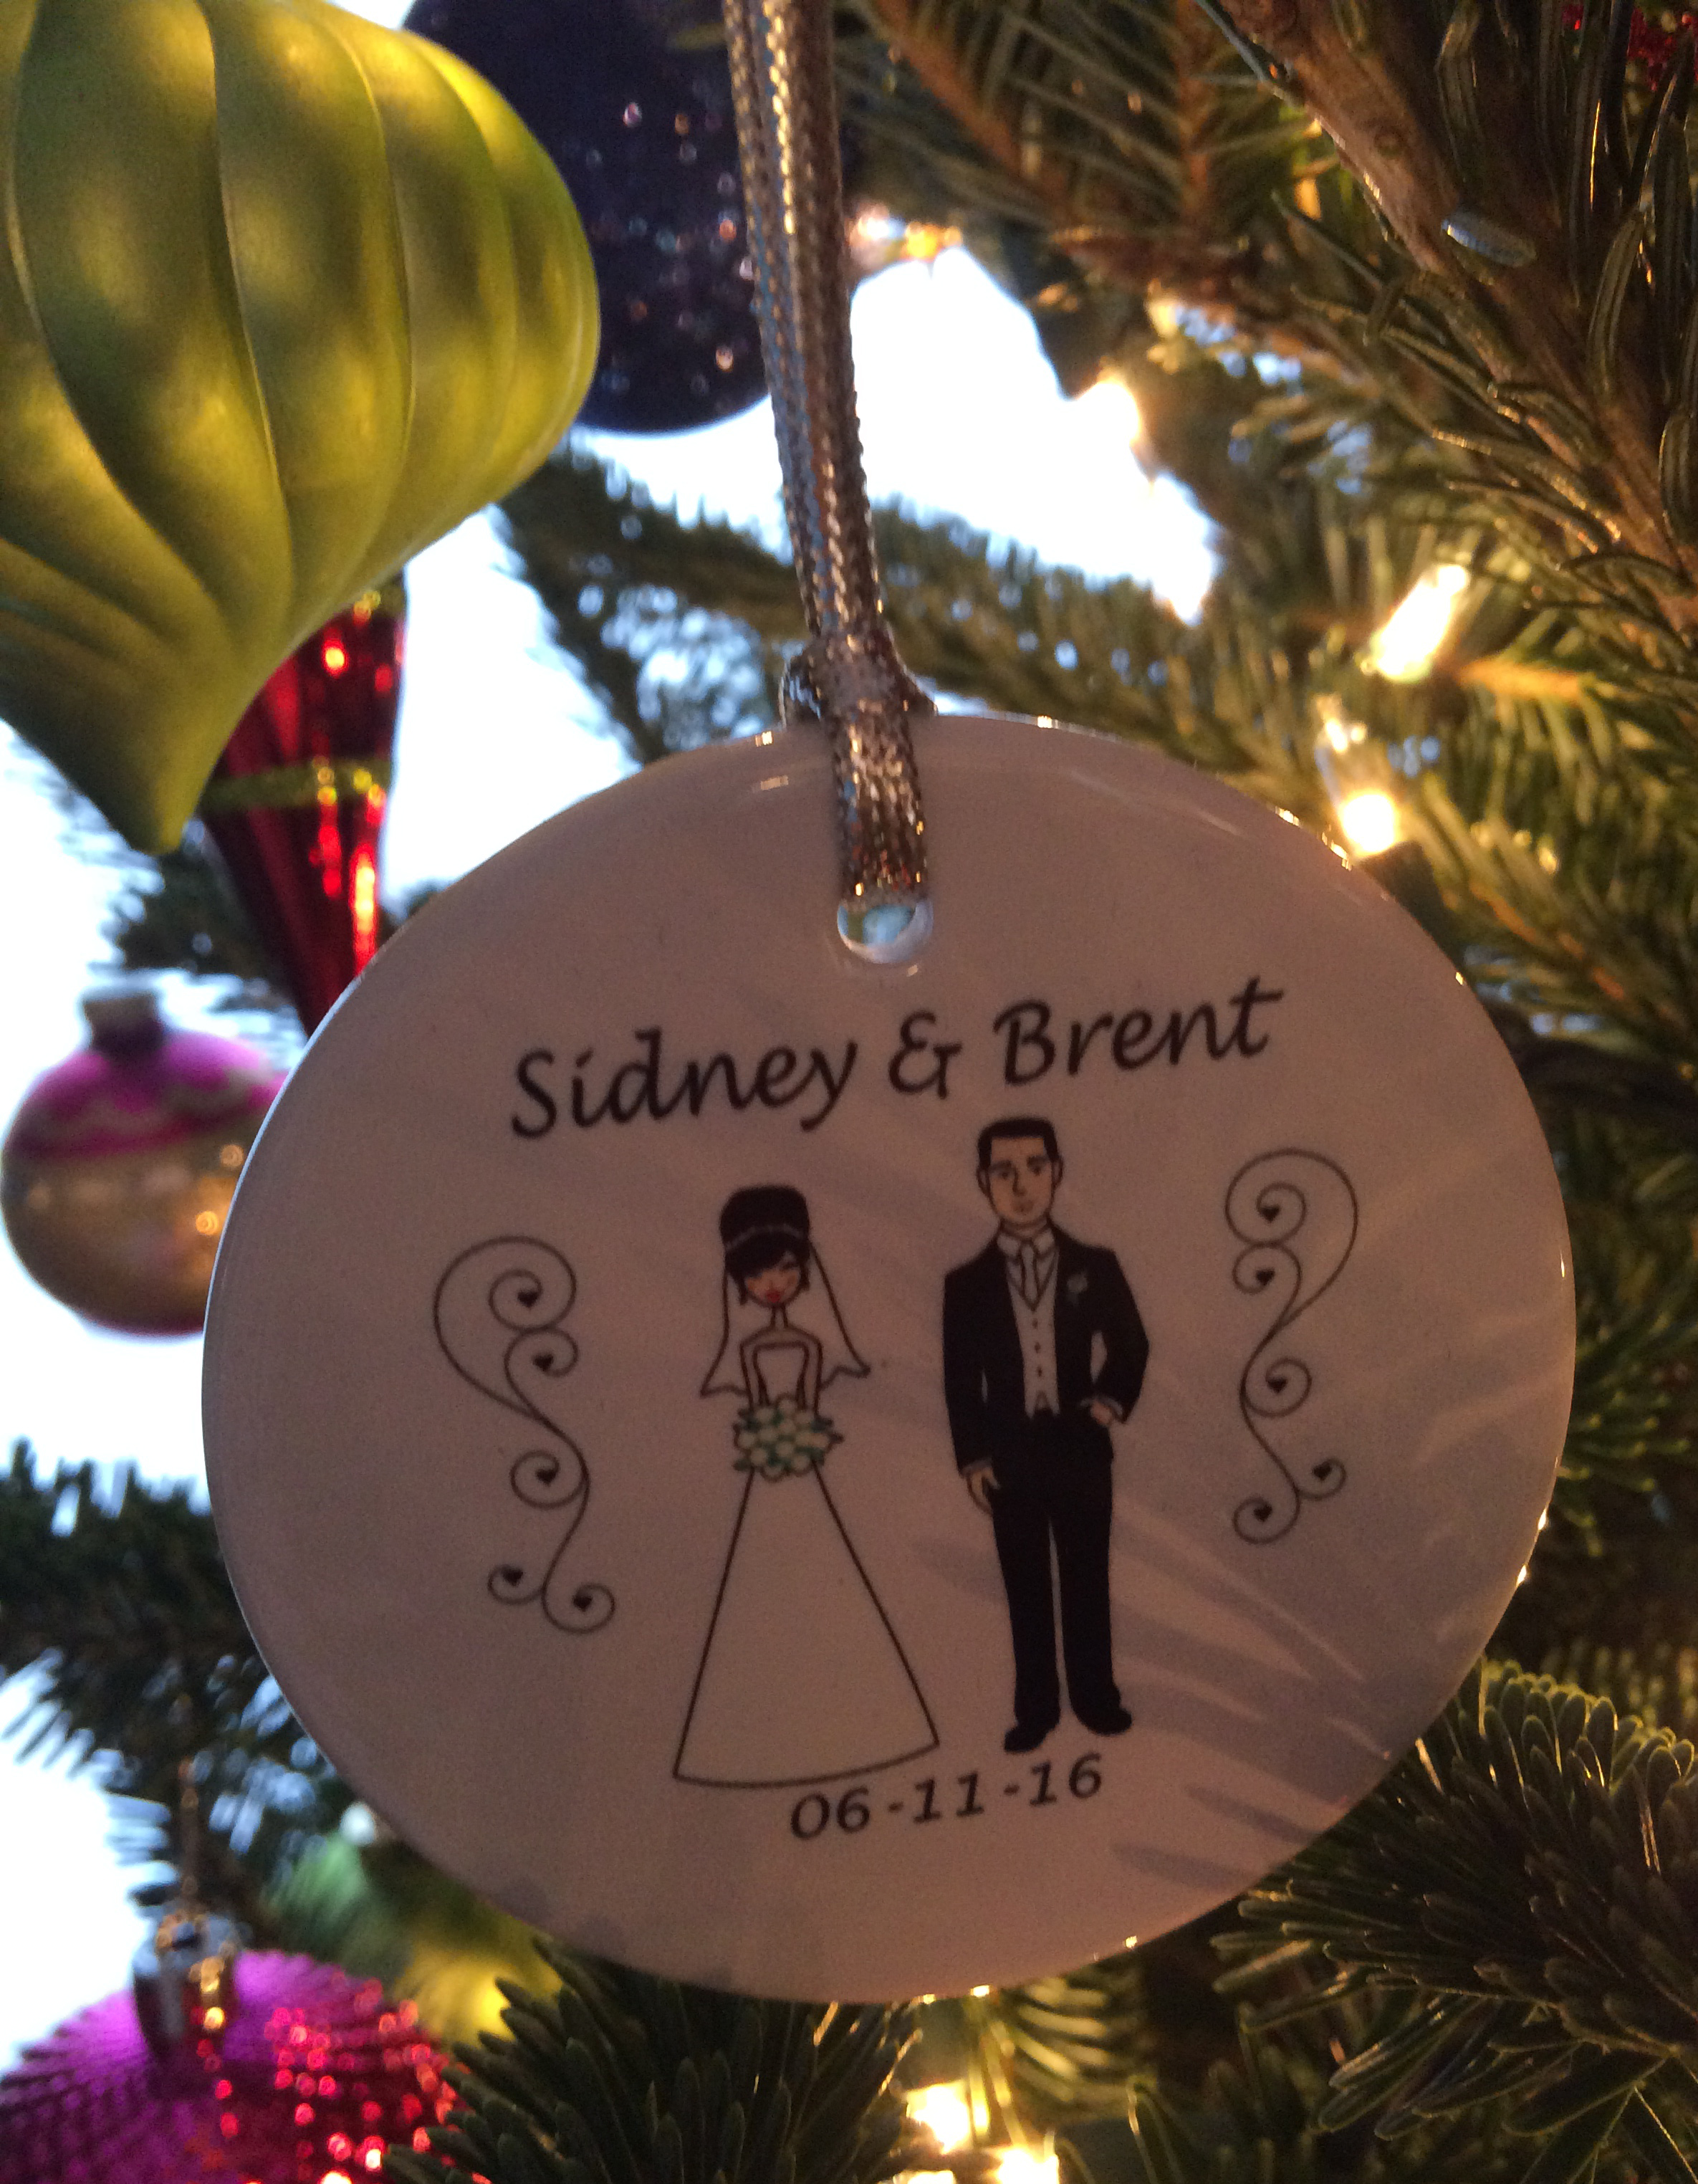 Our sponsor couple, Tim and Kathy McCormick, gave us this ornament as part of the wedding gift they graciously gave us.